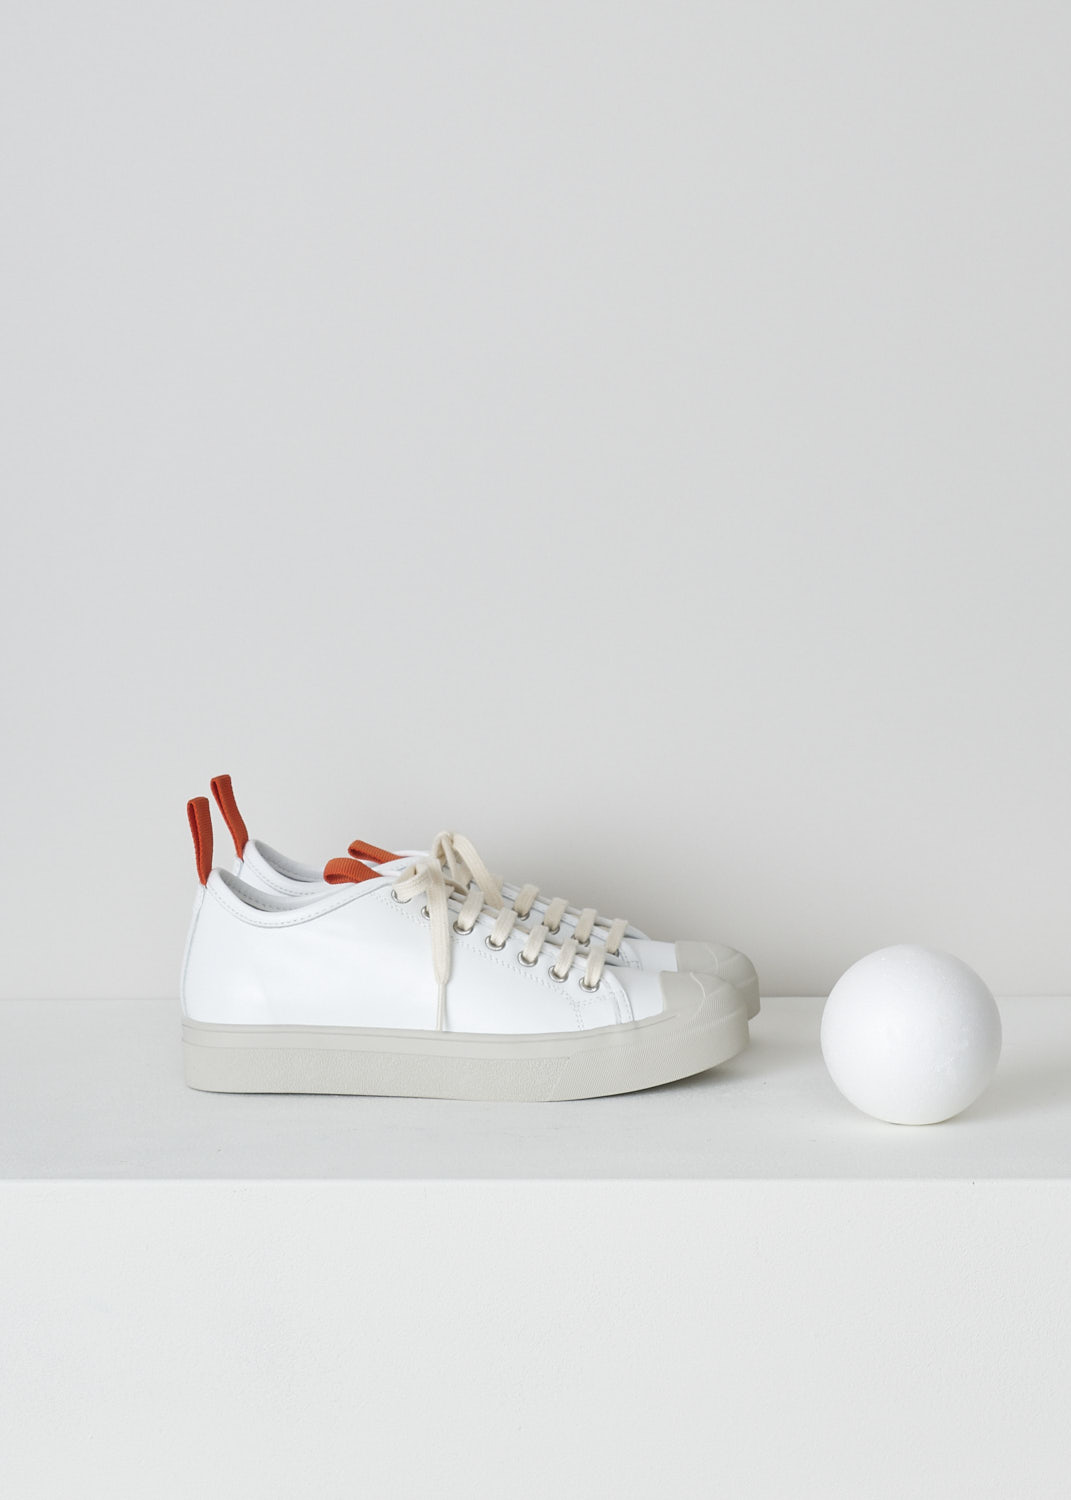 SOFIE Dâ€™HOORE, WHITE LEATHER SNEAKERS WITH RED ACCENTS, FABLE_LCOL_WHCL, White, Side, These white leather sneakers feature a front lace-up closure with white laces. Red pull-tabs can be found on the back of the heel and on the front of the tongue. These sneakers have a round toe with a beige rubber toe cap that goes down into the rubber sole in that same beige color. 

